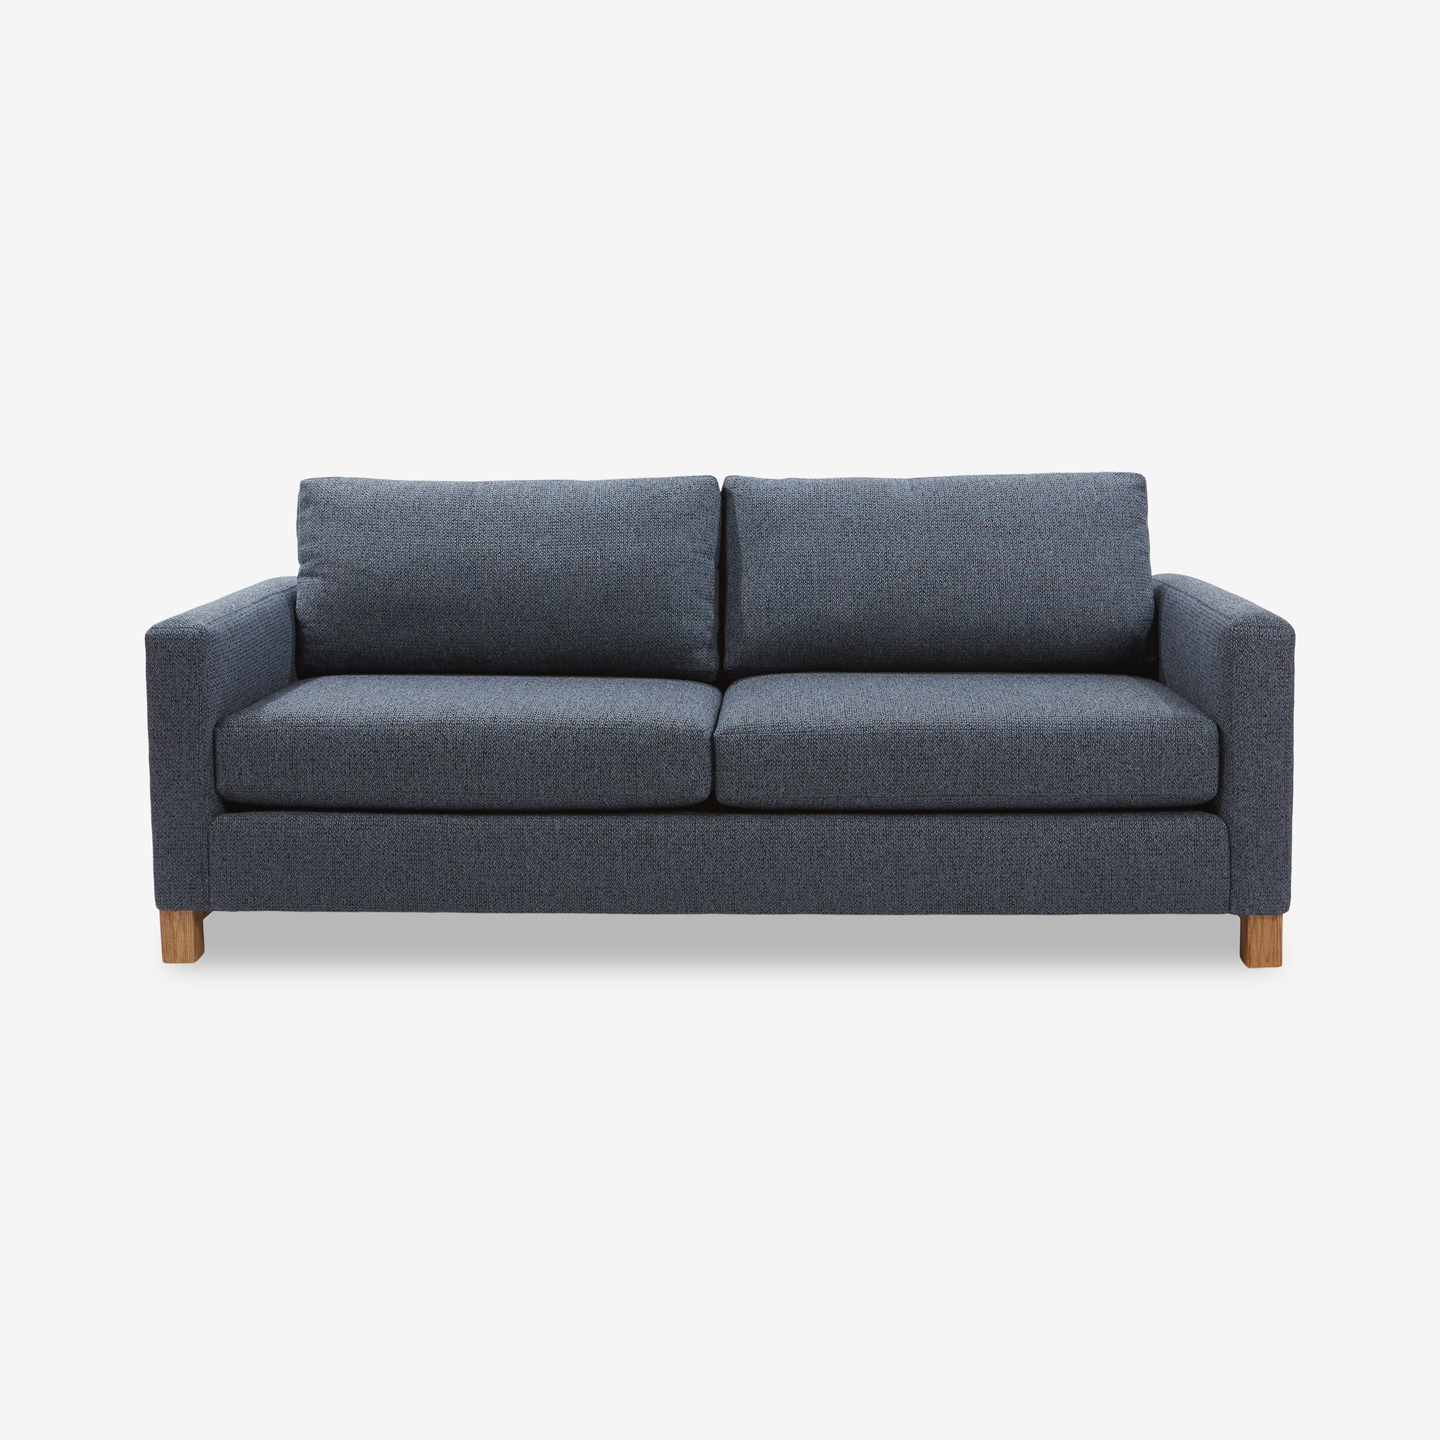 1329_Quincy-Sofa-Blue_Front_2021